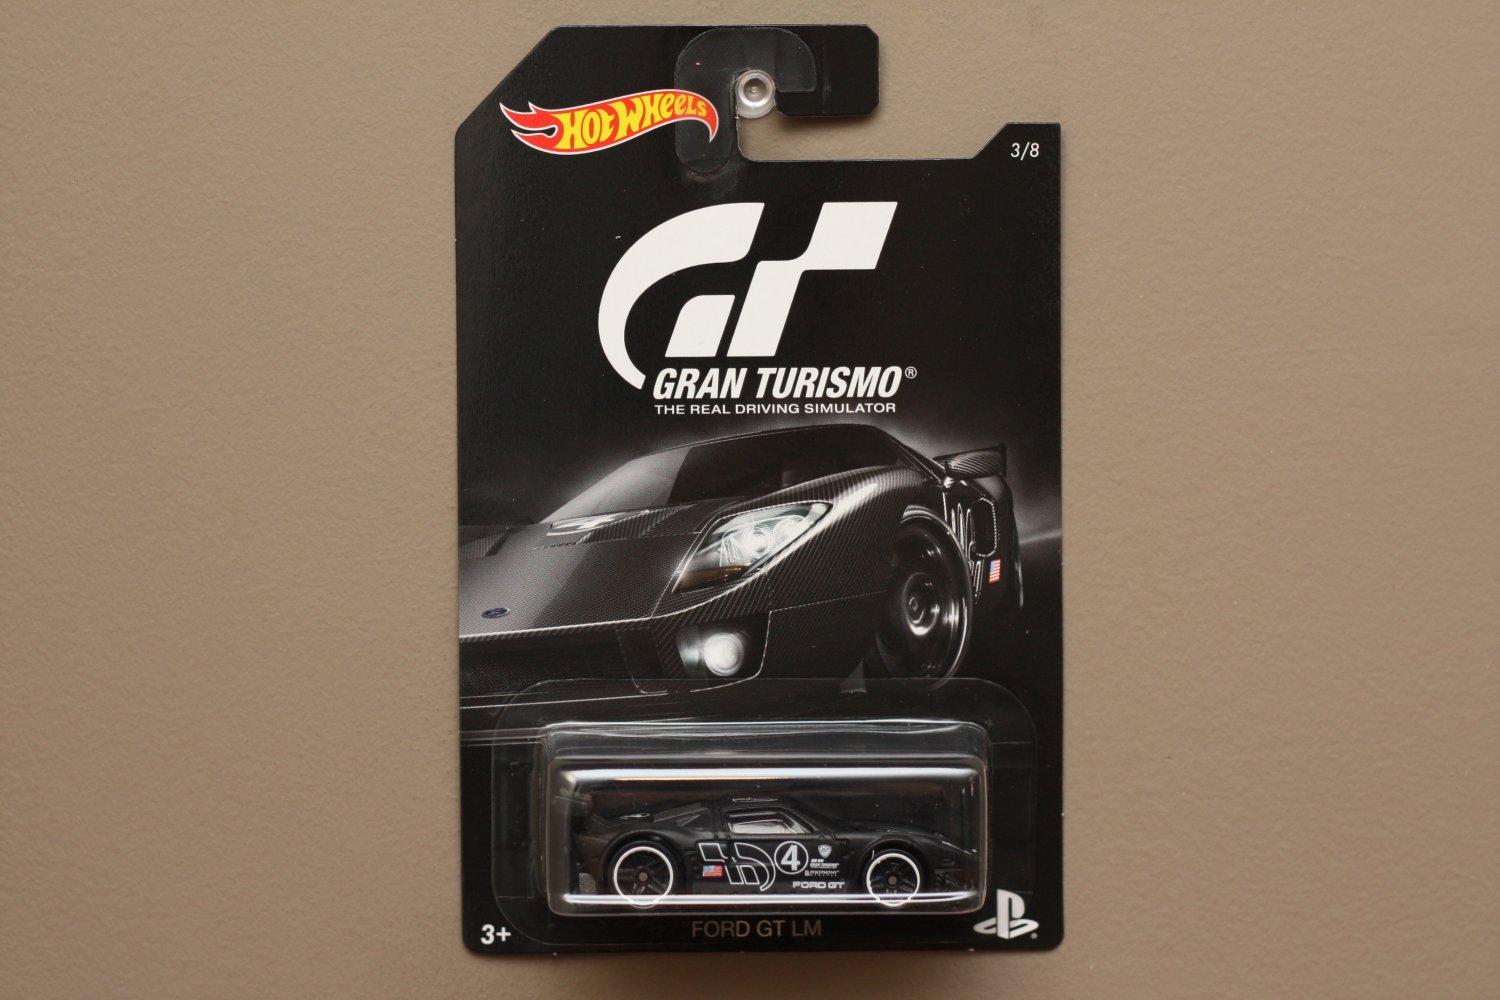 FORD GT LM, Gran Turismo 3/8